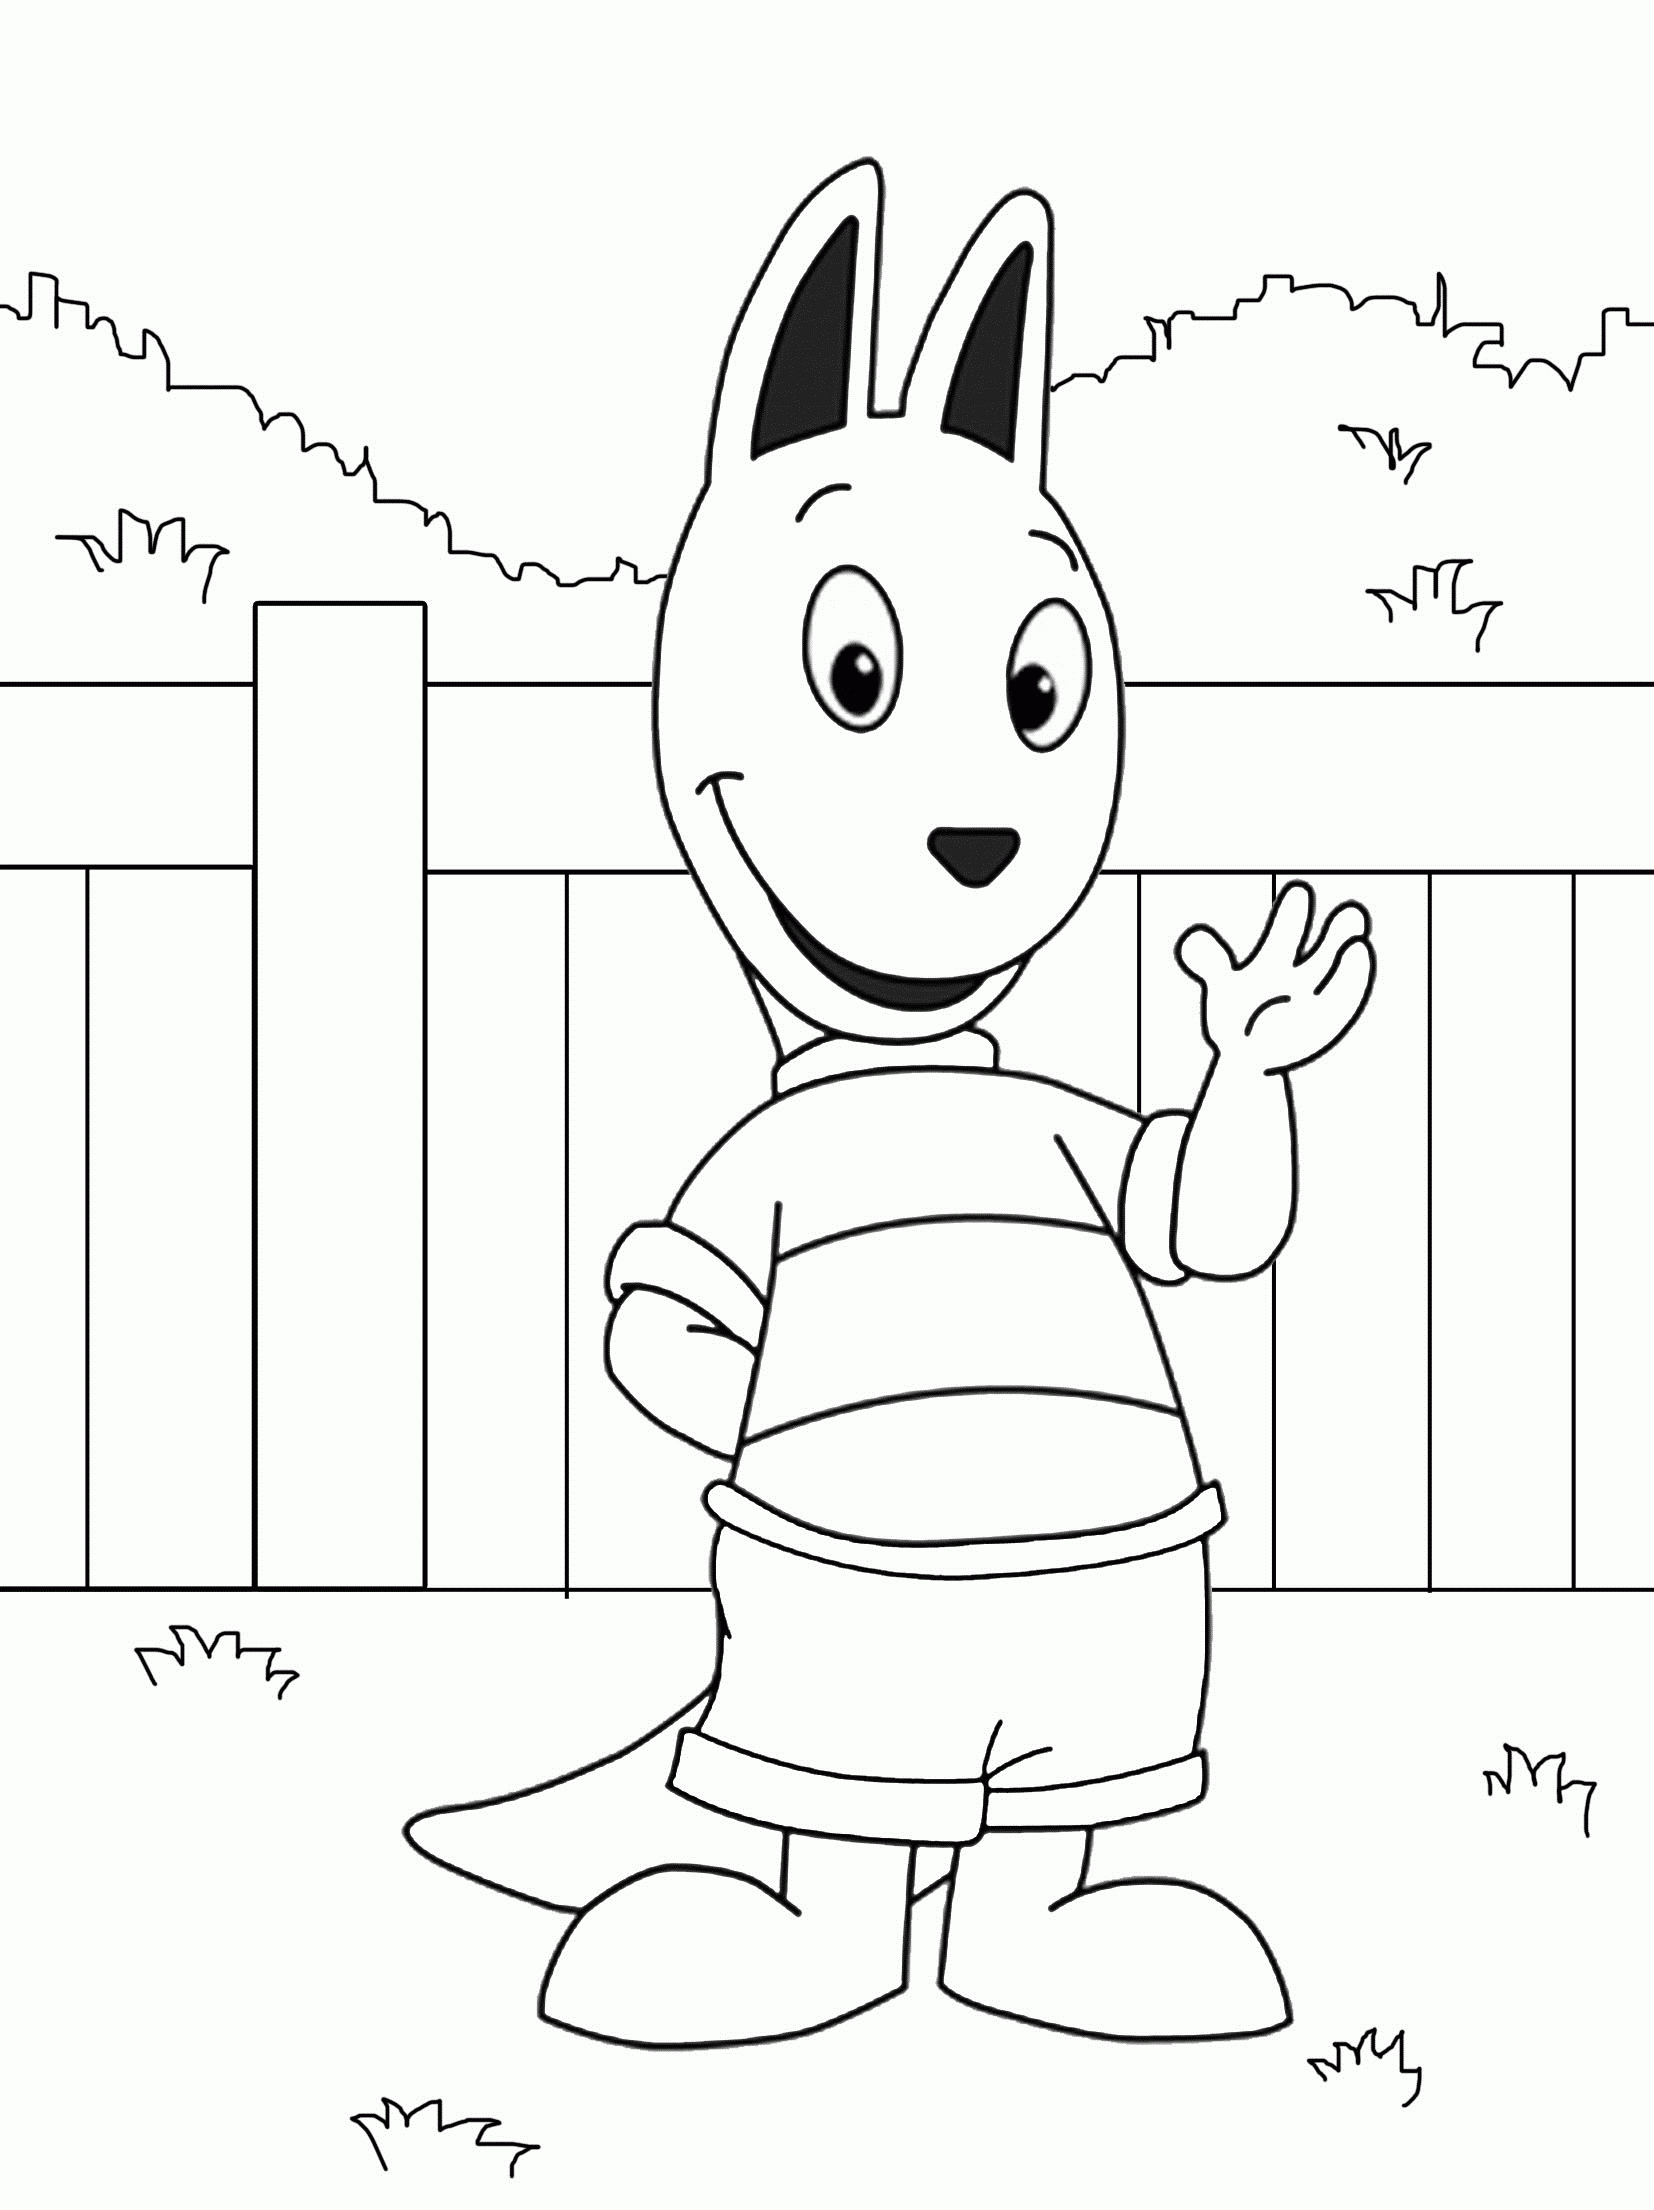 Printable Backyardigans Coloring Pages   Coloring Me   Coloring Home